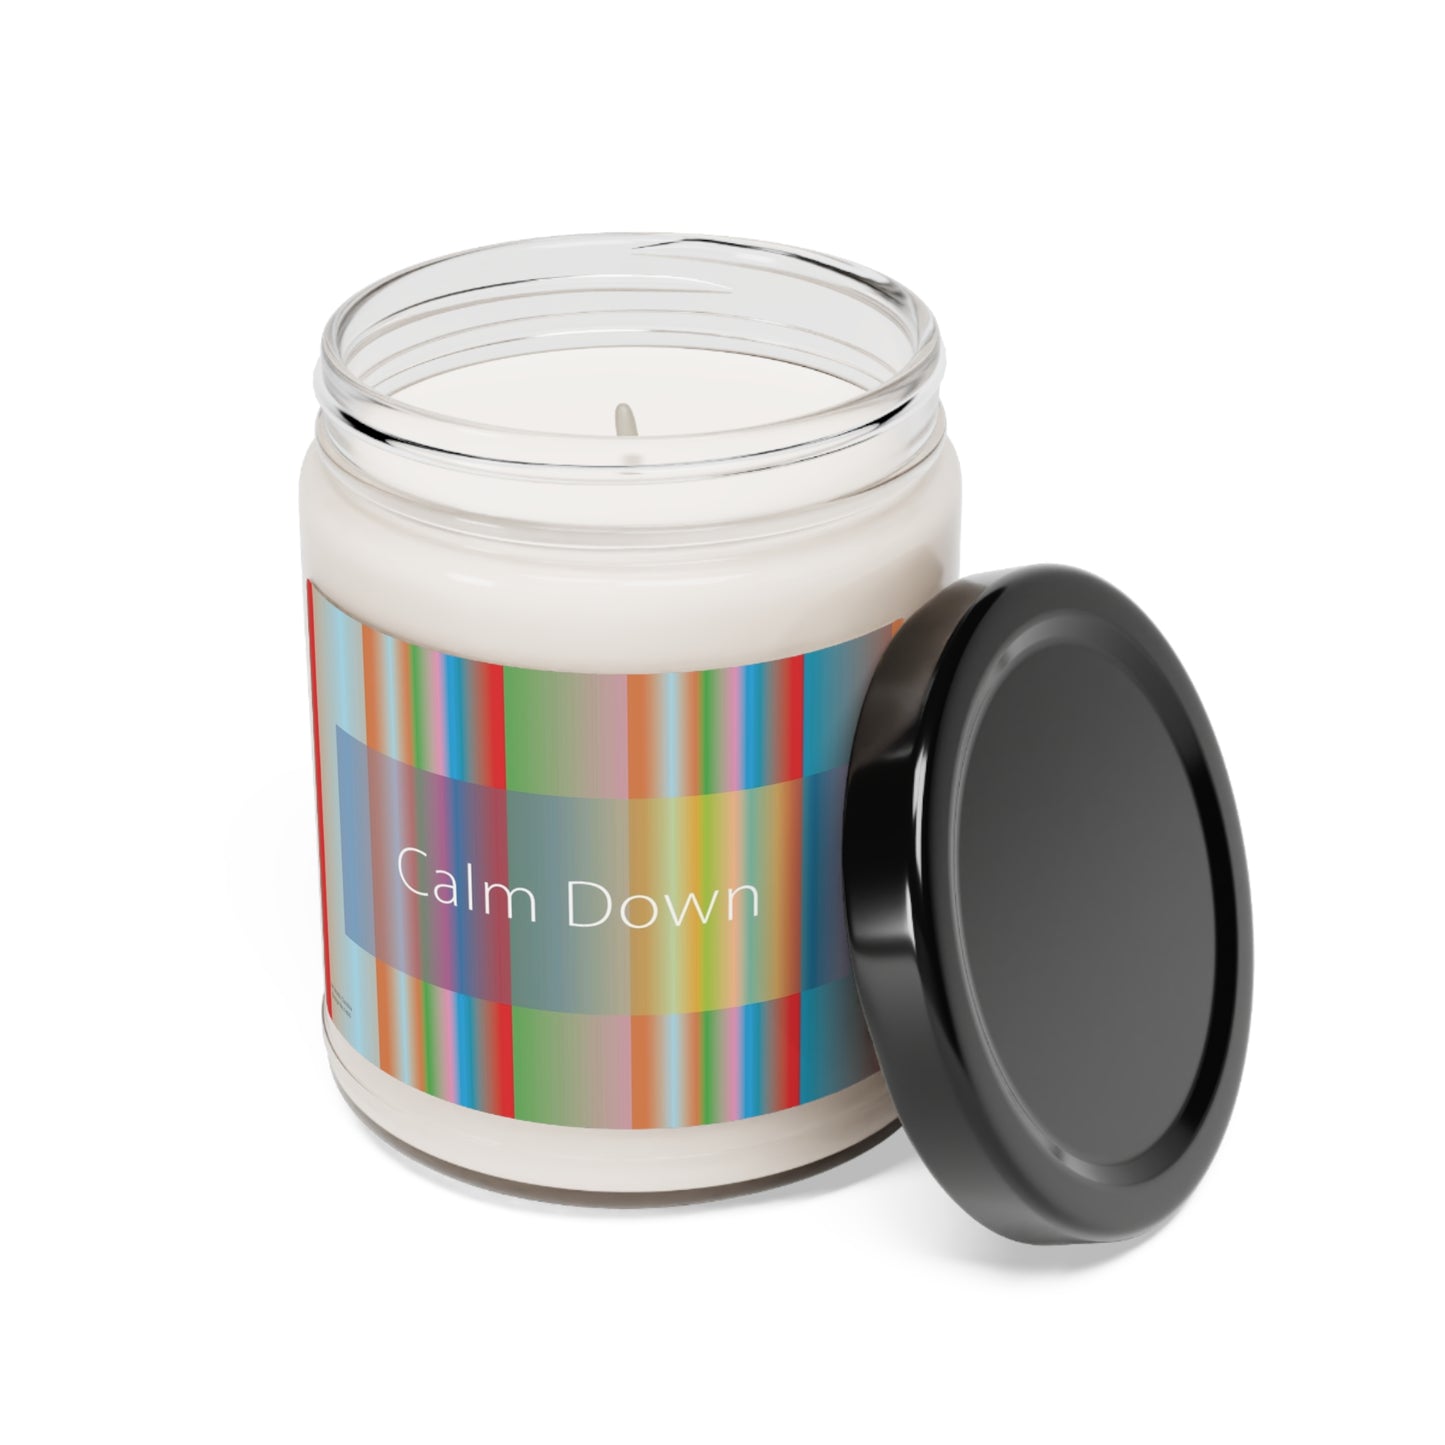 Scented Soy Candle, 9oz Calm Down - Design No.1400